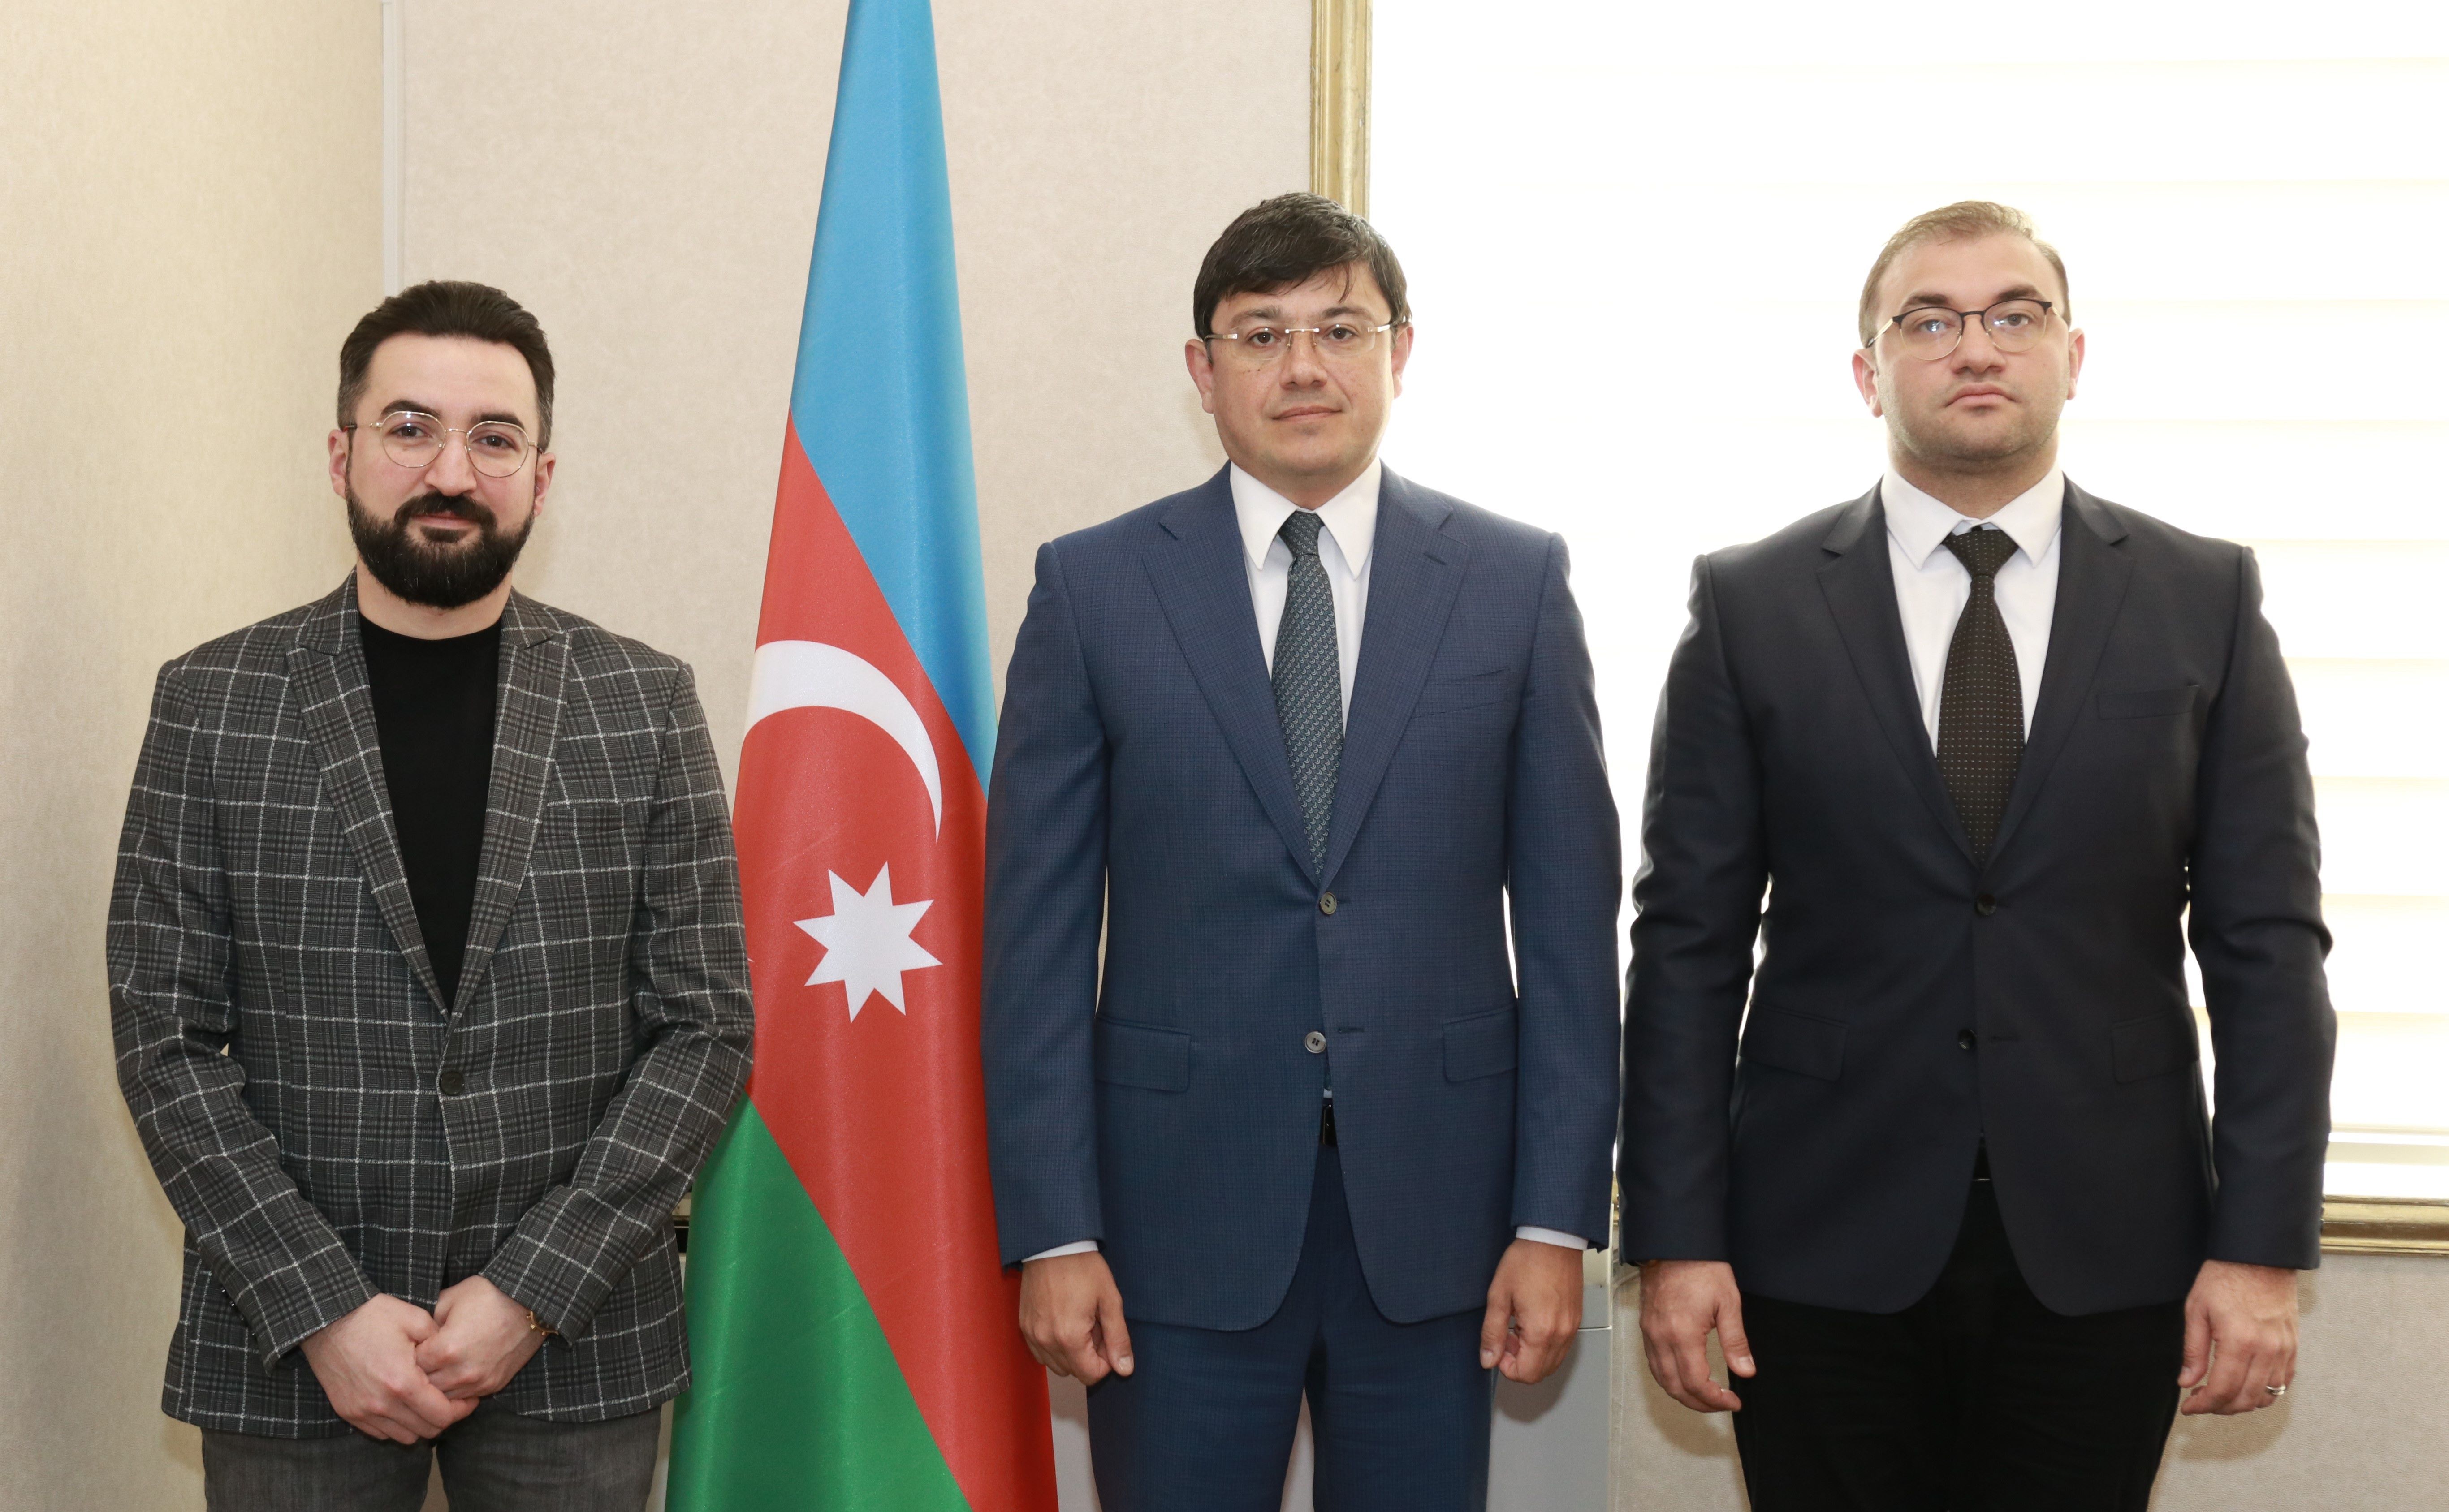 The Preparation process of the Third Forum of Azerbaijani Doctors in Germany was debated at the State Committee